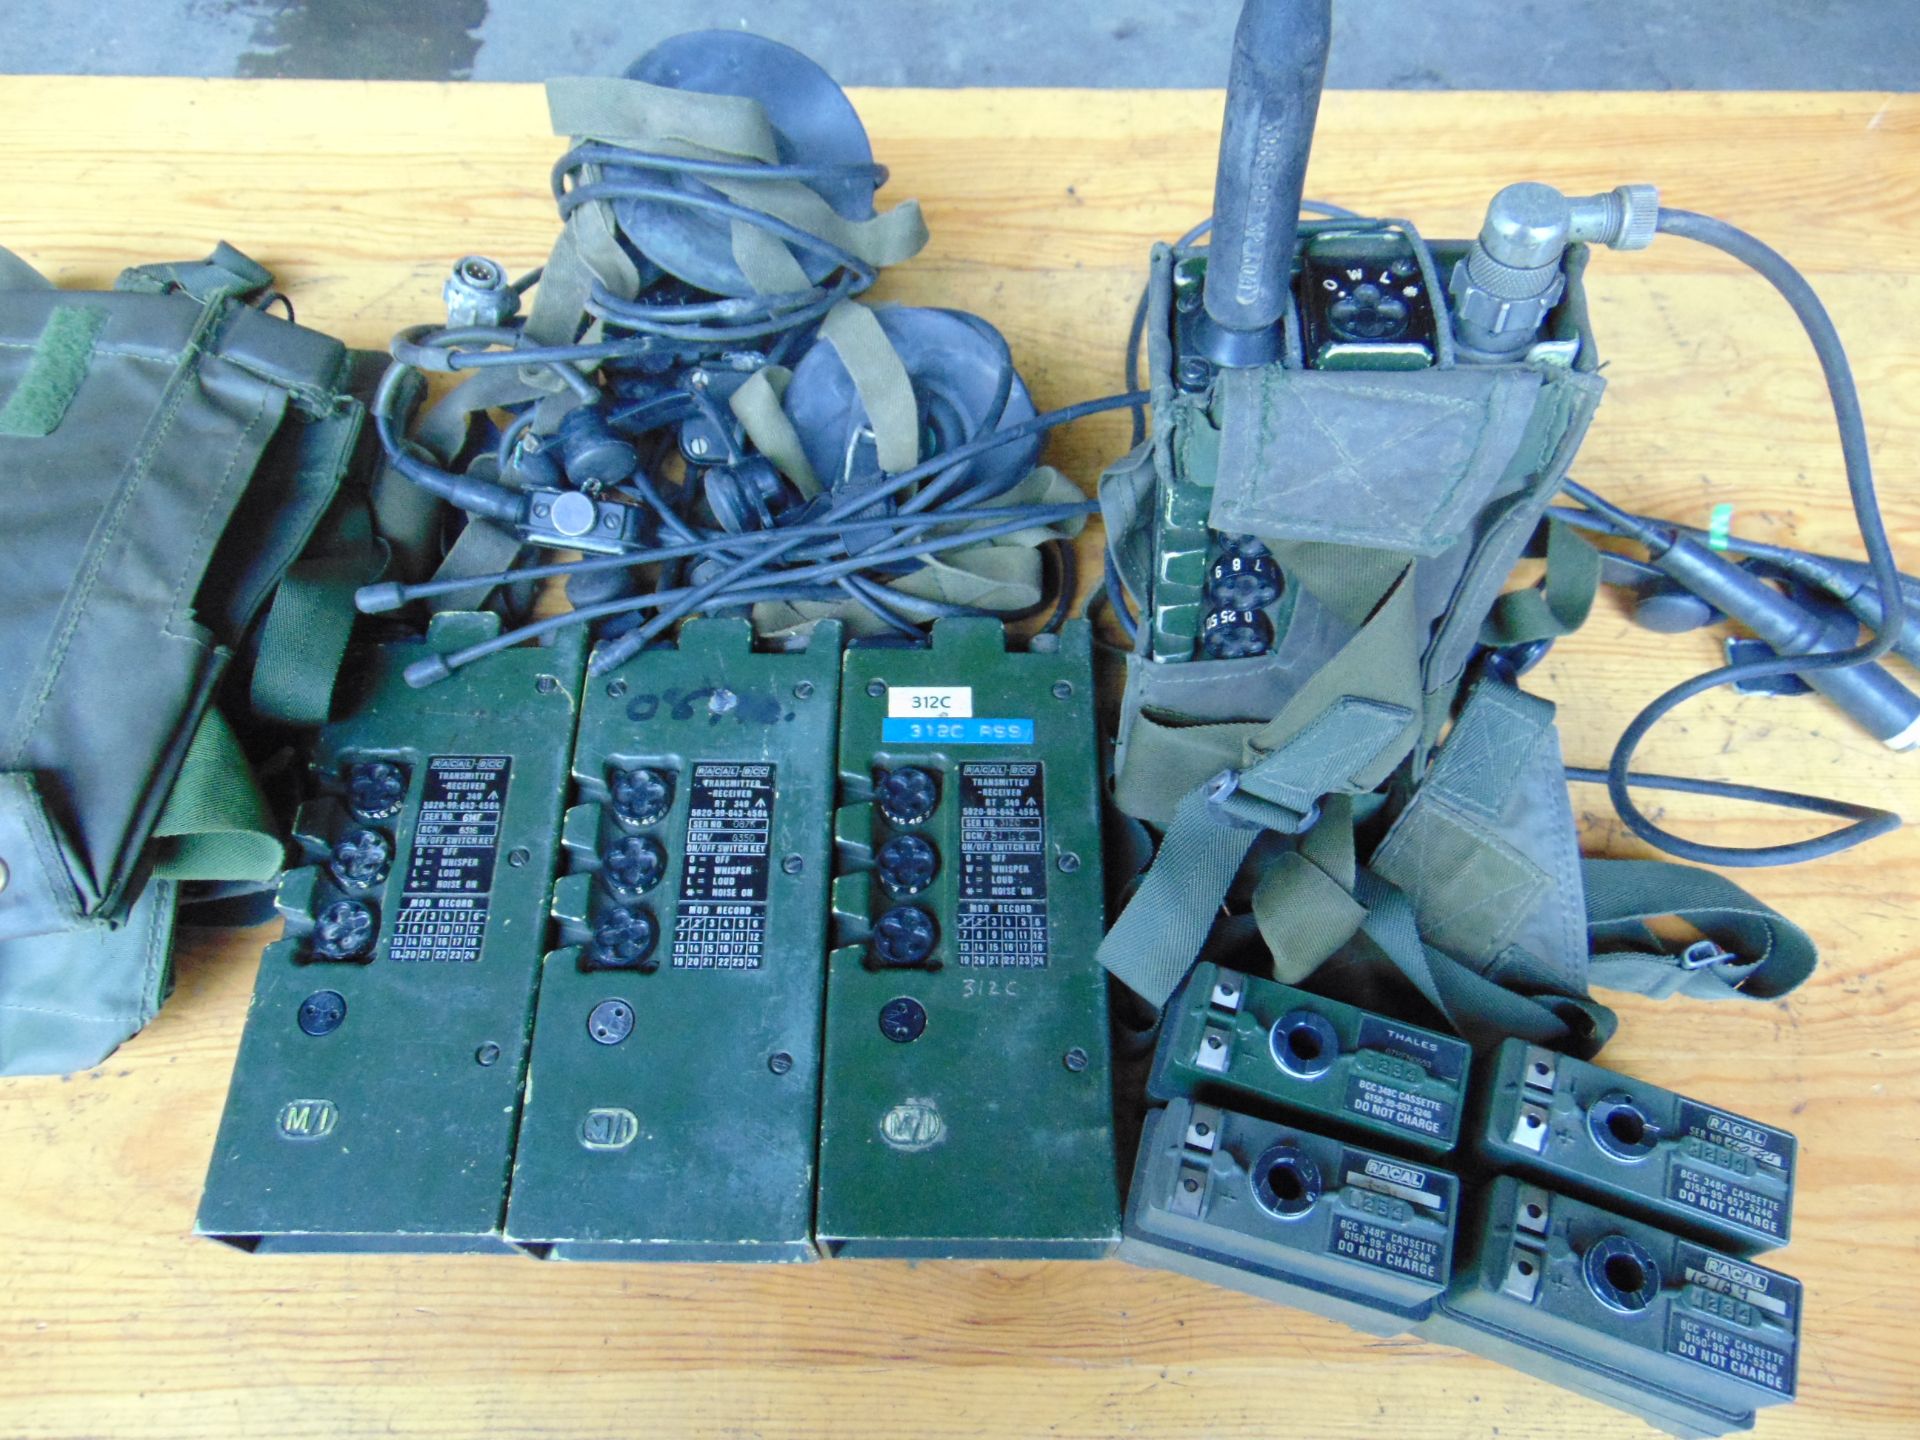 4 x UK / RT 349 Transmitter Receiver Complete as shown - Image 4 of 6